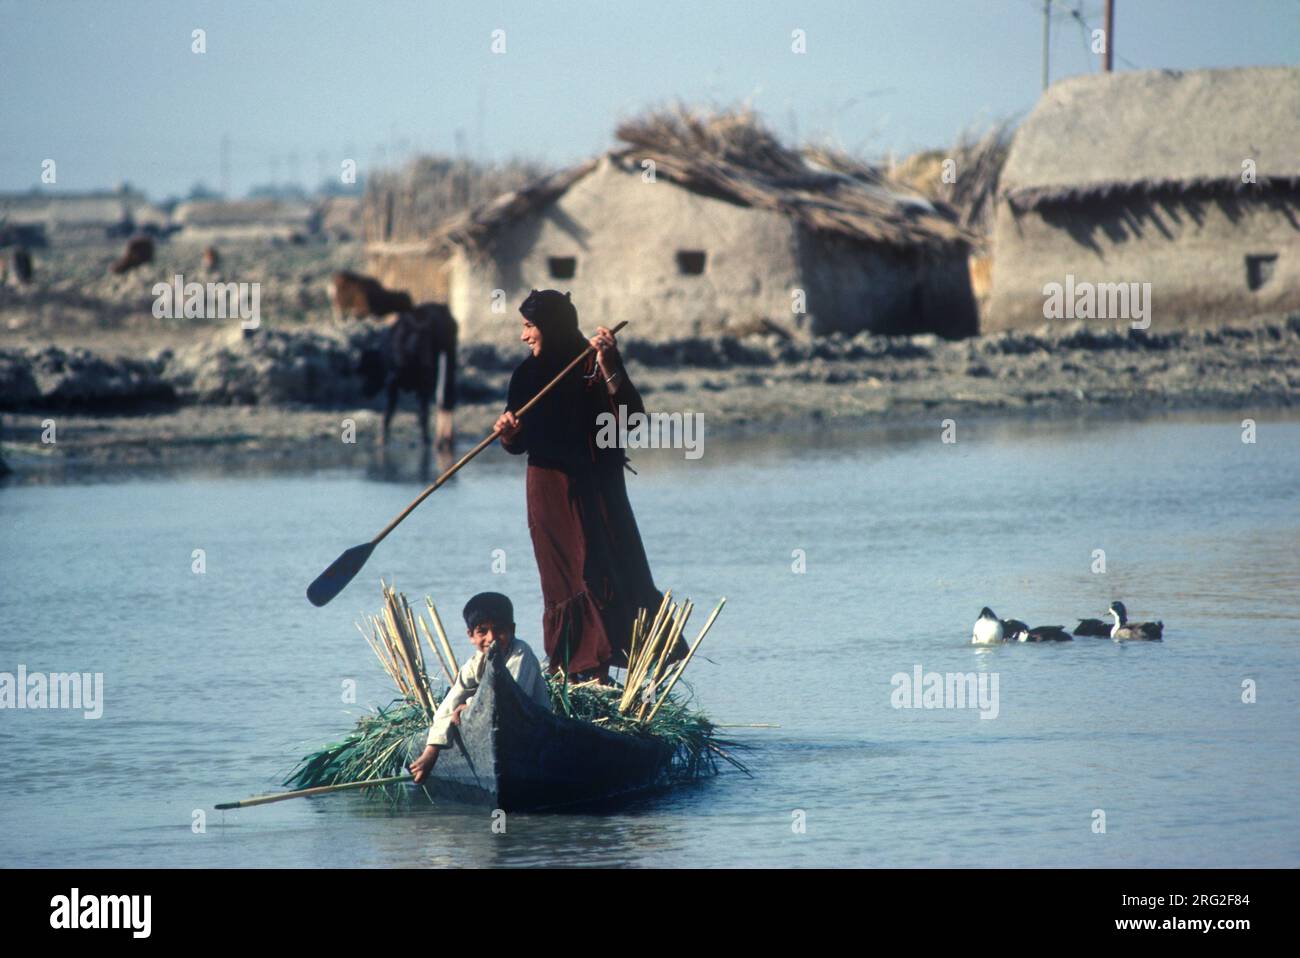 Marsh Arabs Iraq 1980s. Mother and son, child in canoe transporting recently cut reeds. Adobe homes farming on banks of the rivers Tigris and Euphrates wetlands, Hammar marshes. Southern Iraq 1980s HOMER SYKES Stock Photo